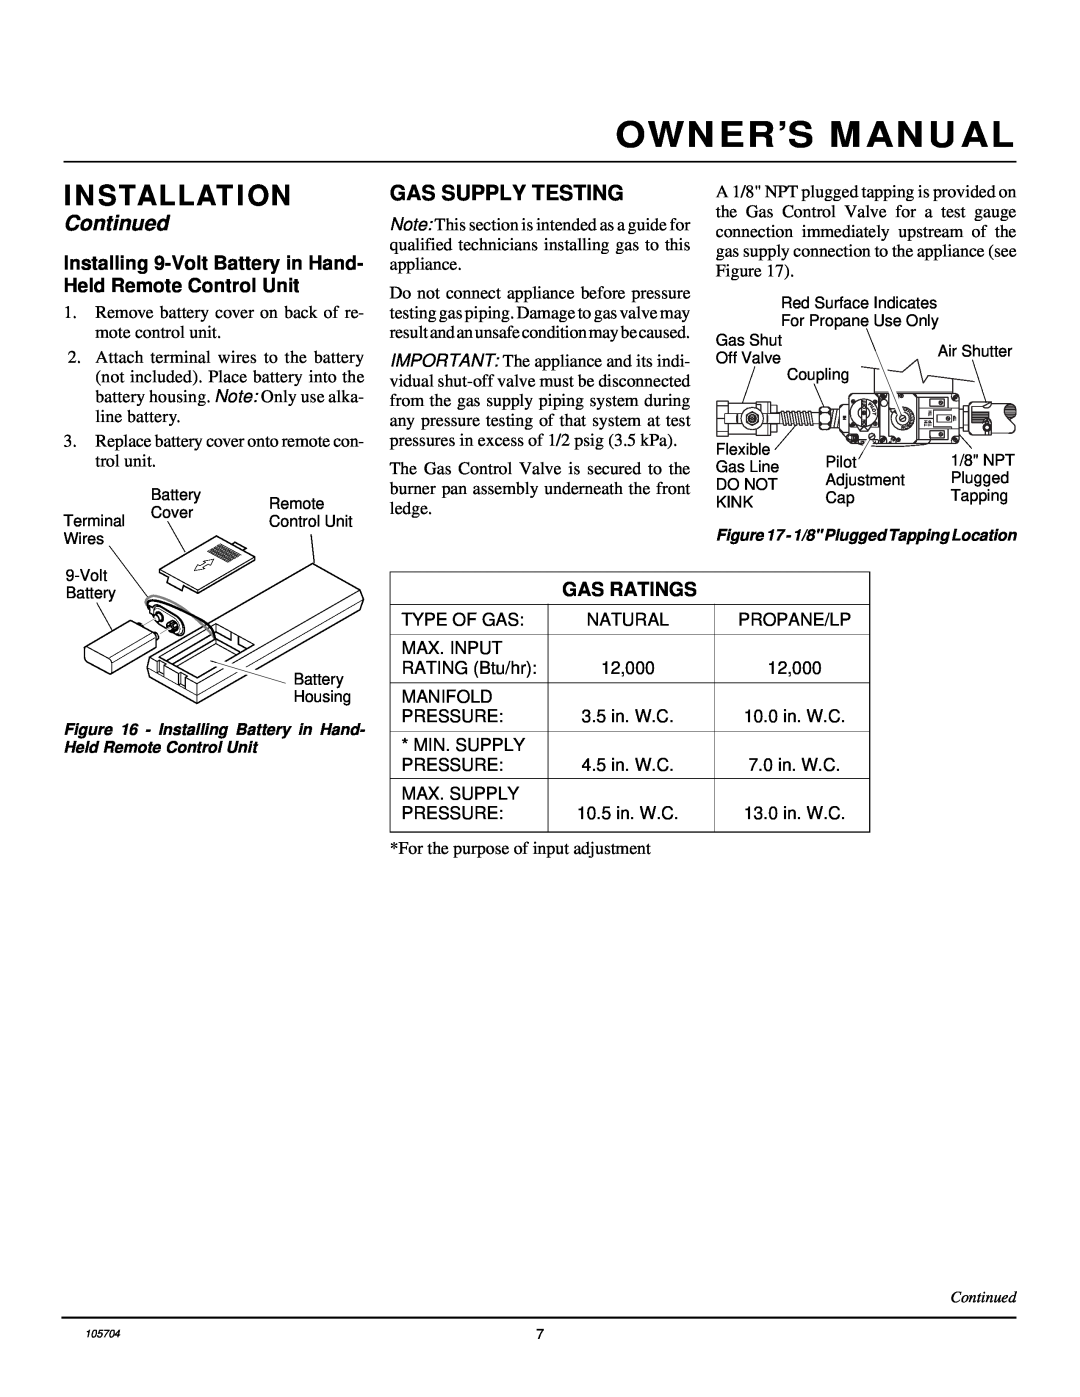 Desa VGL450N, VGL450P installation manual Gas Supply Testing, Gas Ratings, Installation, Continued 